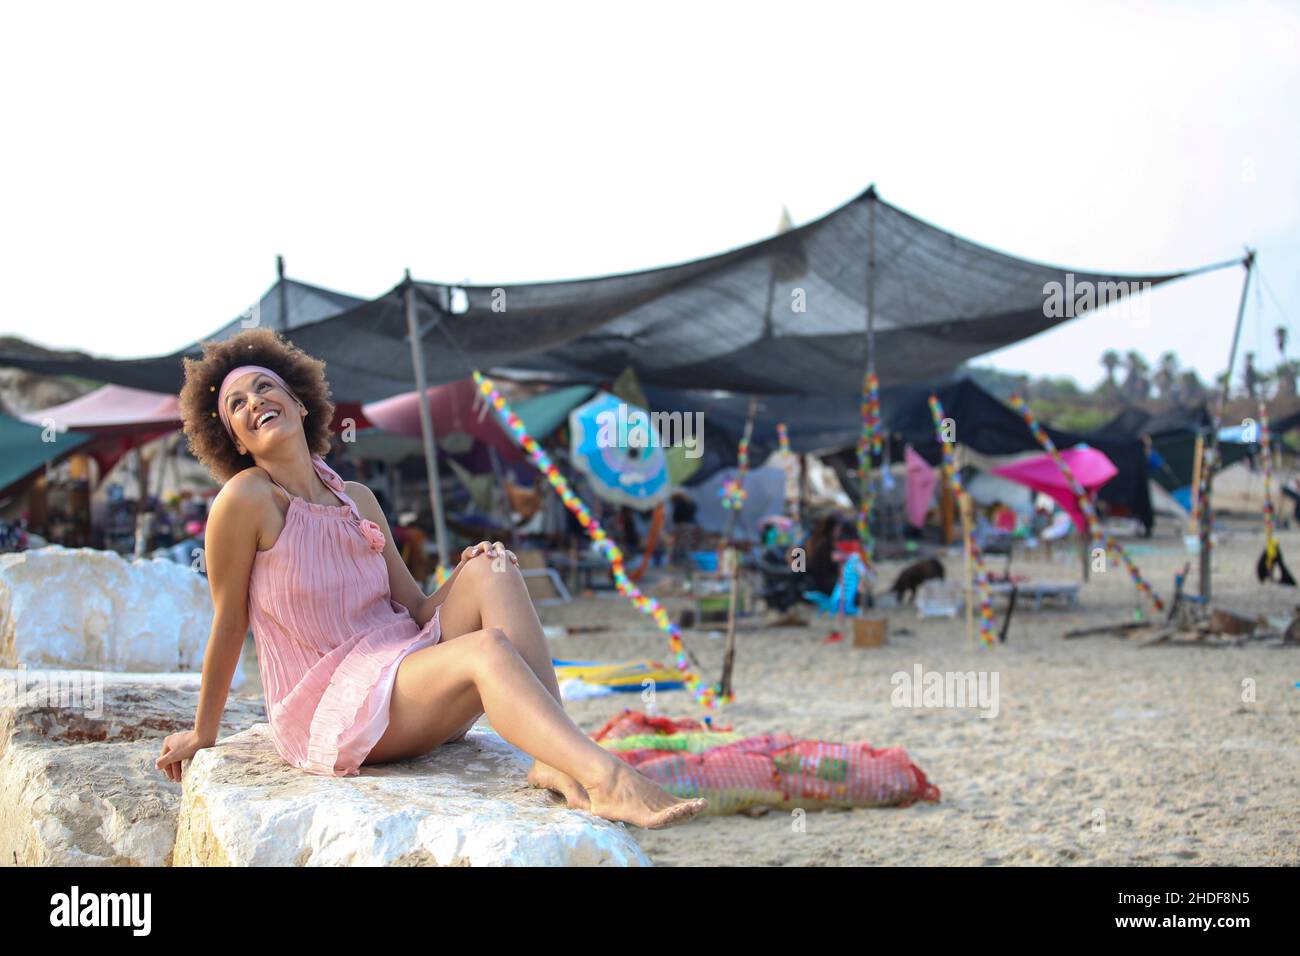 A 28 year old woman on the beach Festival tent in the background Stock Photo